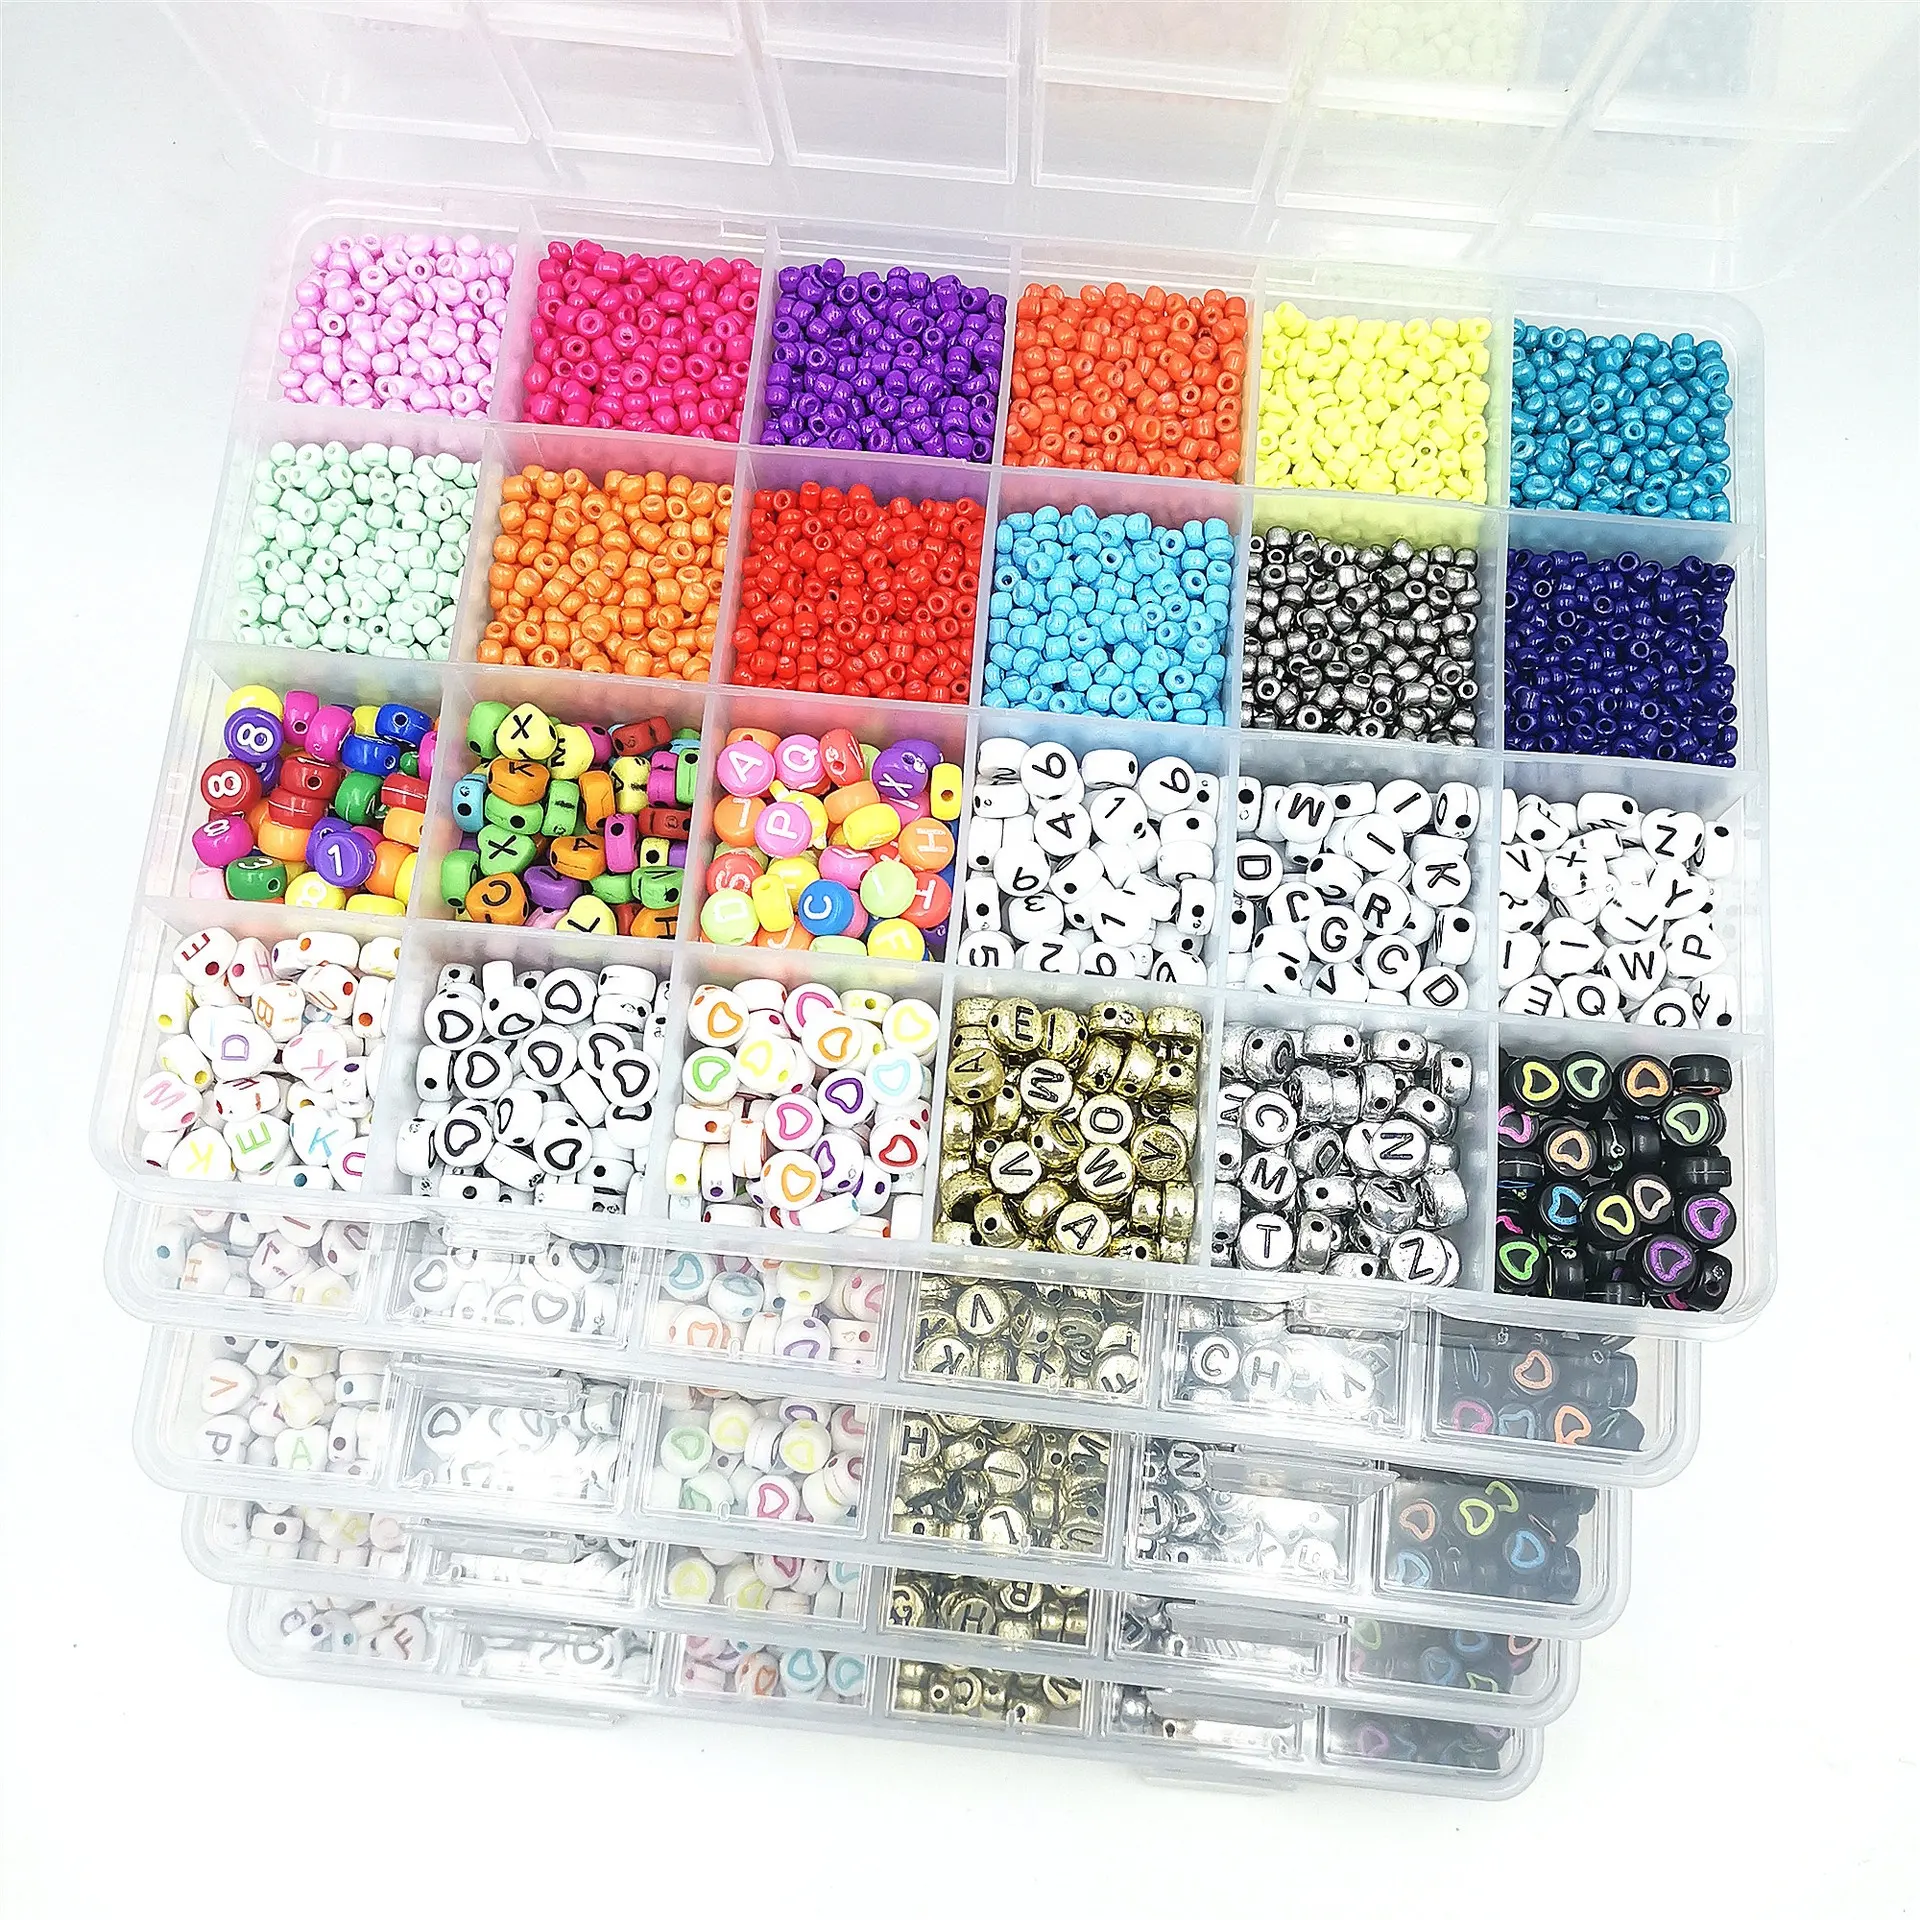 hot sale 24 colors 2/3/4mm Glass Seed Beads for Jewelry Making Supplies Kit Craft Set necklace bracelet making